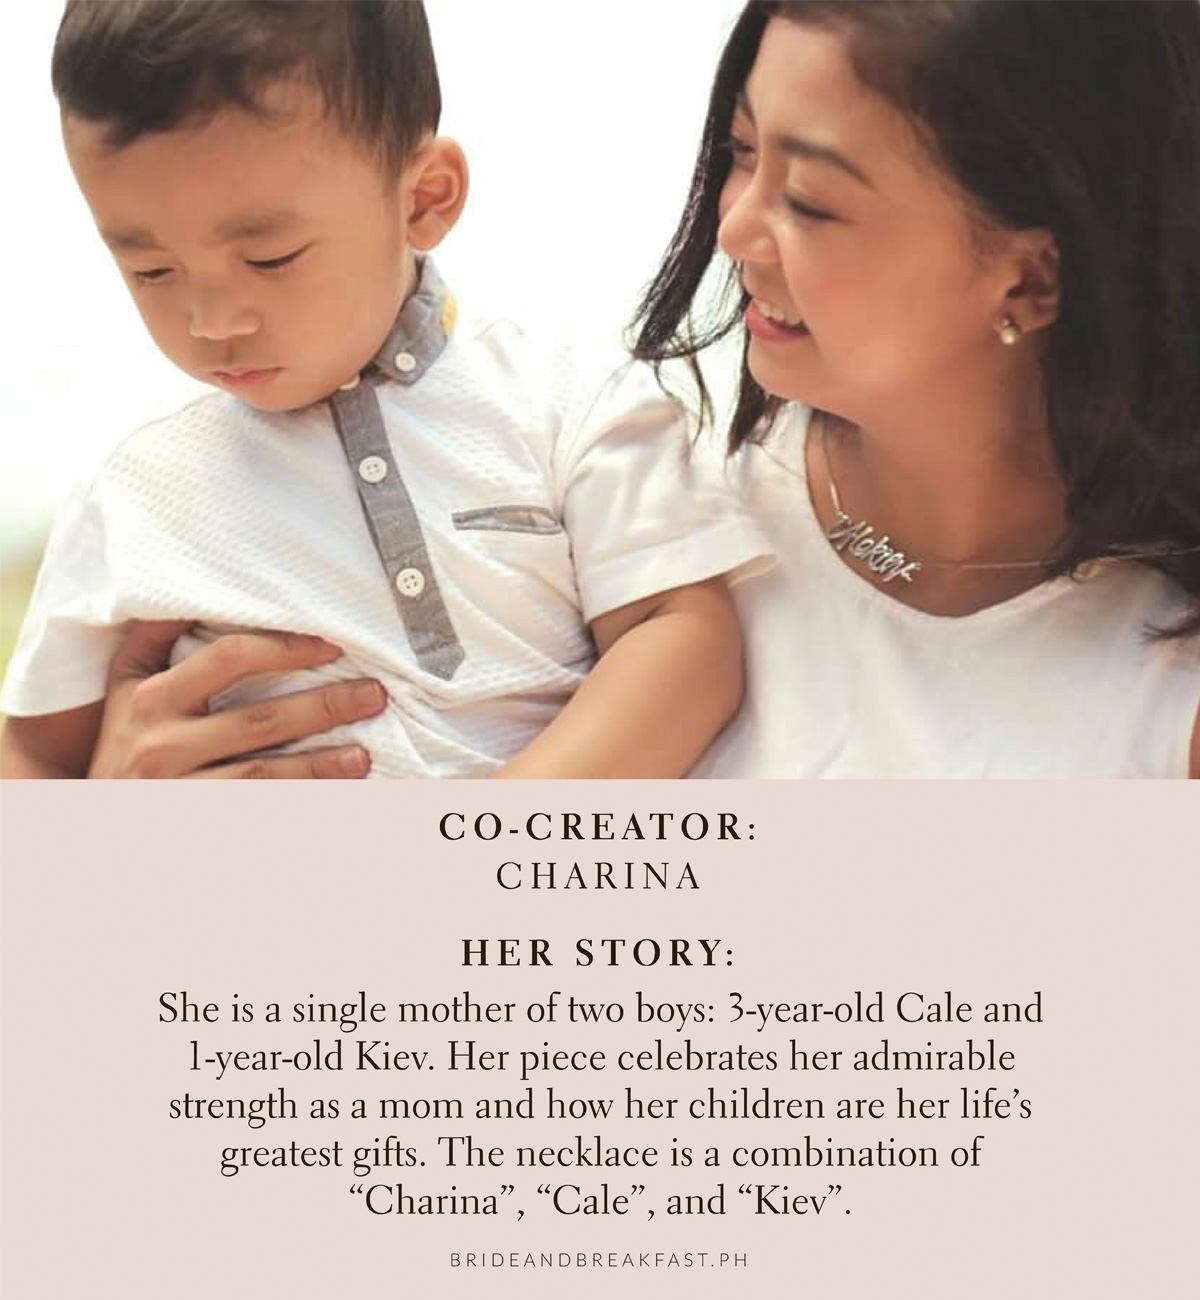 Co-Creator: Charina Her Story: She is a single mother of two boys: 3-year-old Cale and 1-year-old Kiev. Her piece celebrates her admirable strength as a mom and how her children are her life's greatest gifts. The necklace is a combination of "Charina", "Cale", and "Kiev".